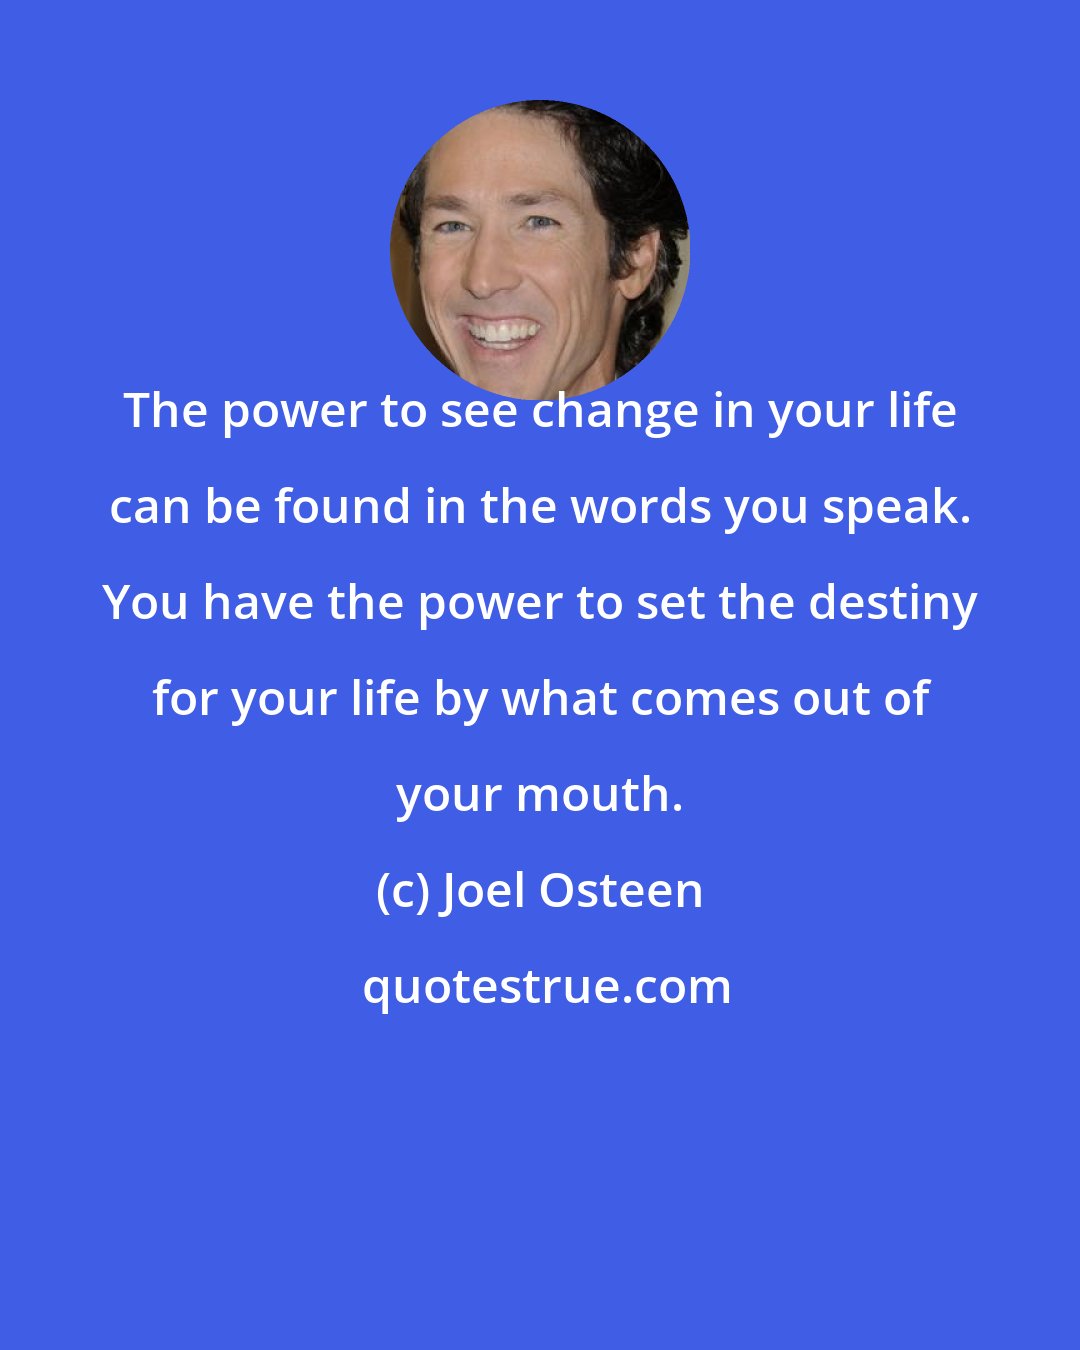 Joel Osteen: The power to see change in your life can be found in the words you speak. You have the power to set the destiny for your life by what comes out of your mouth.